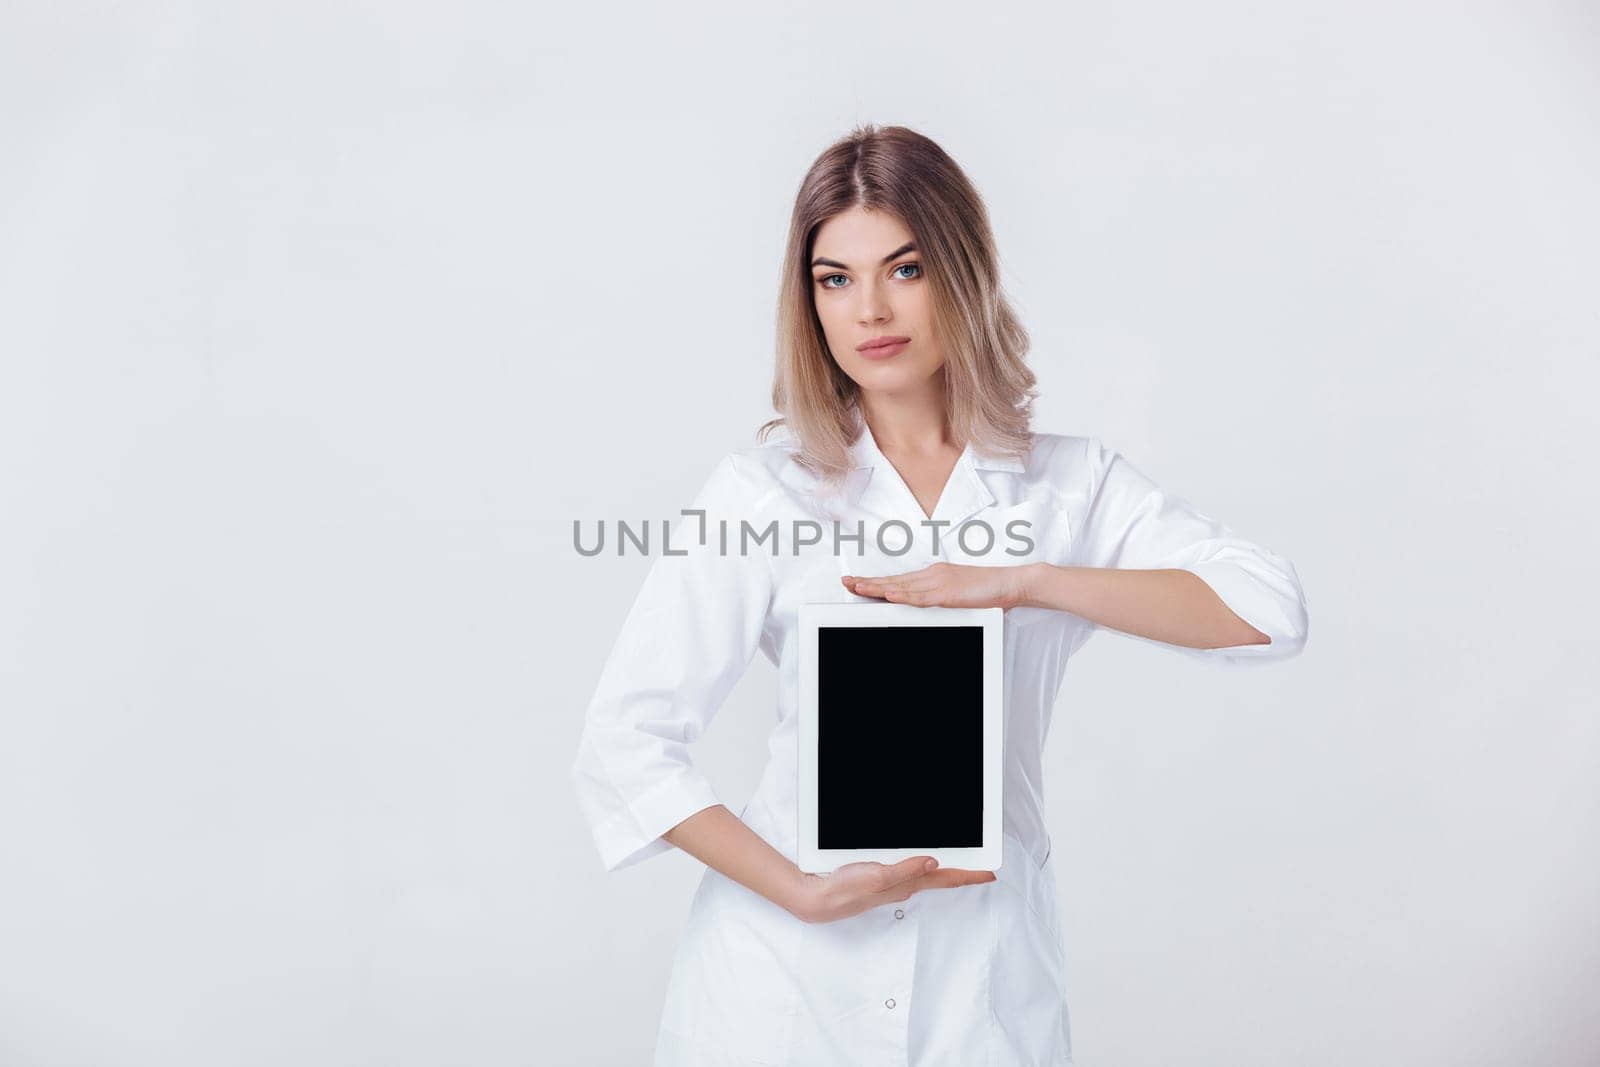 P young doctor showing the screen of digital tablet by erstudio